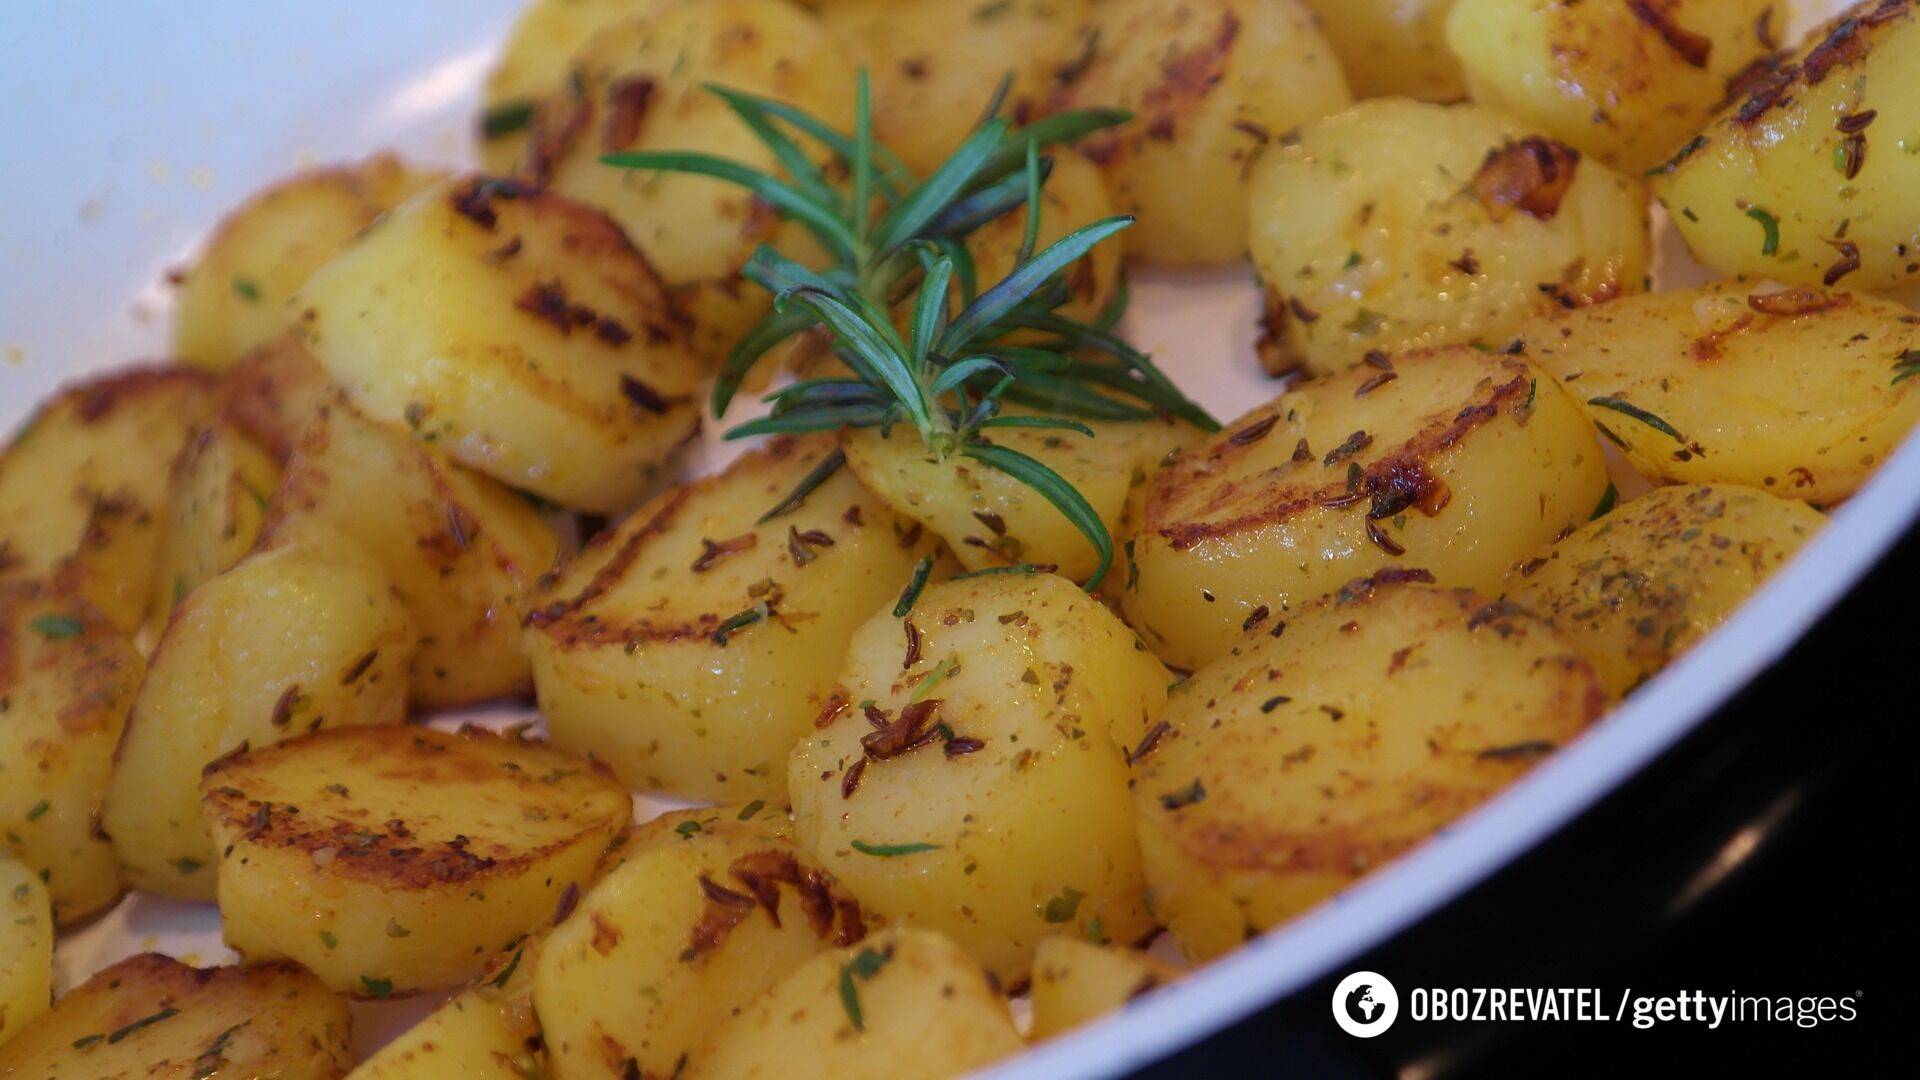 All potato varieties need to be cooked for different amounts of time